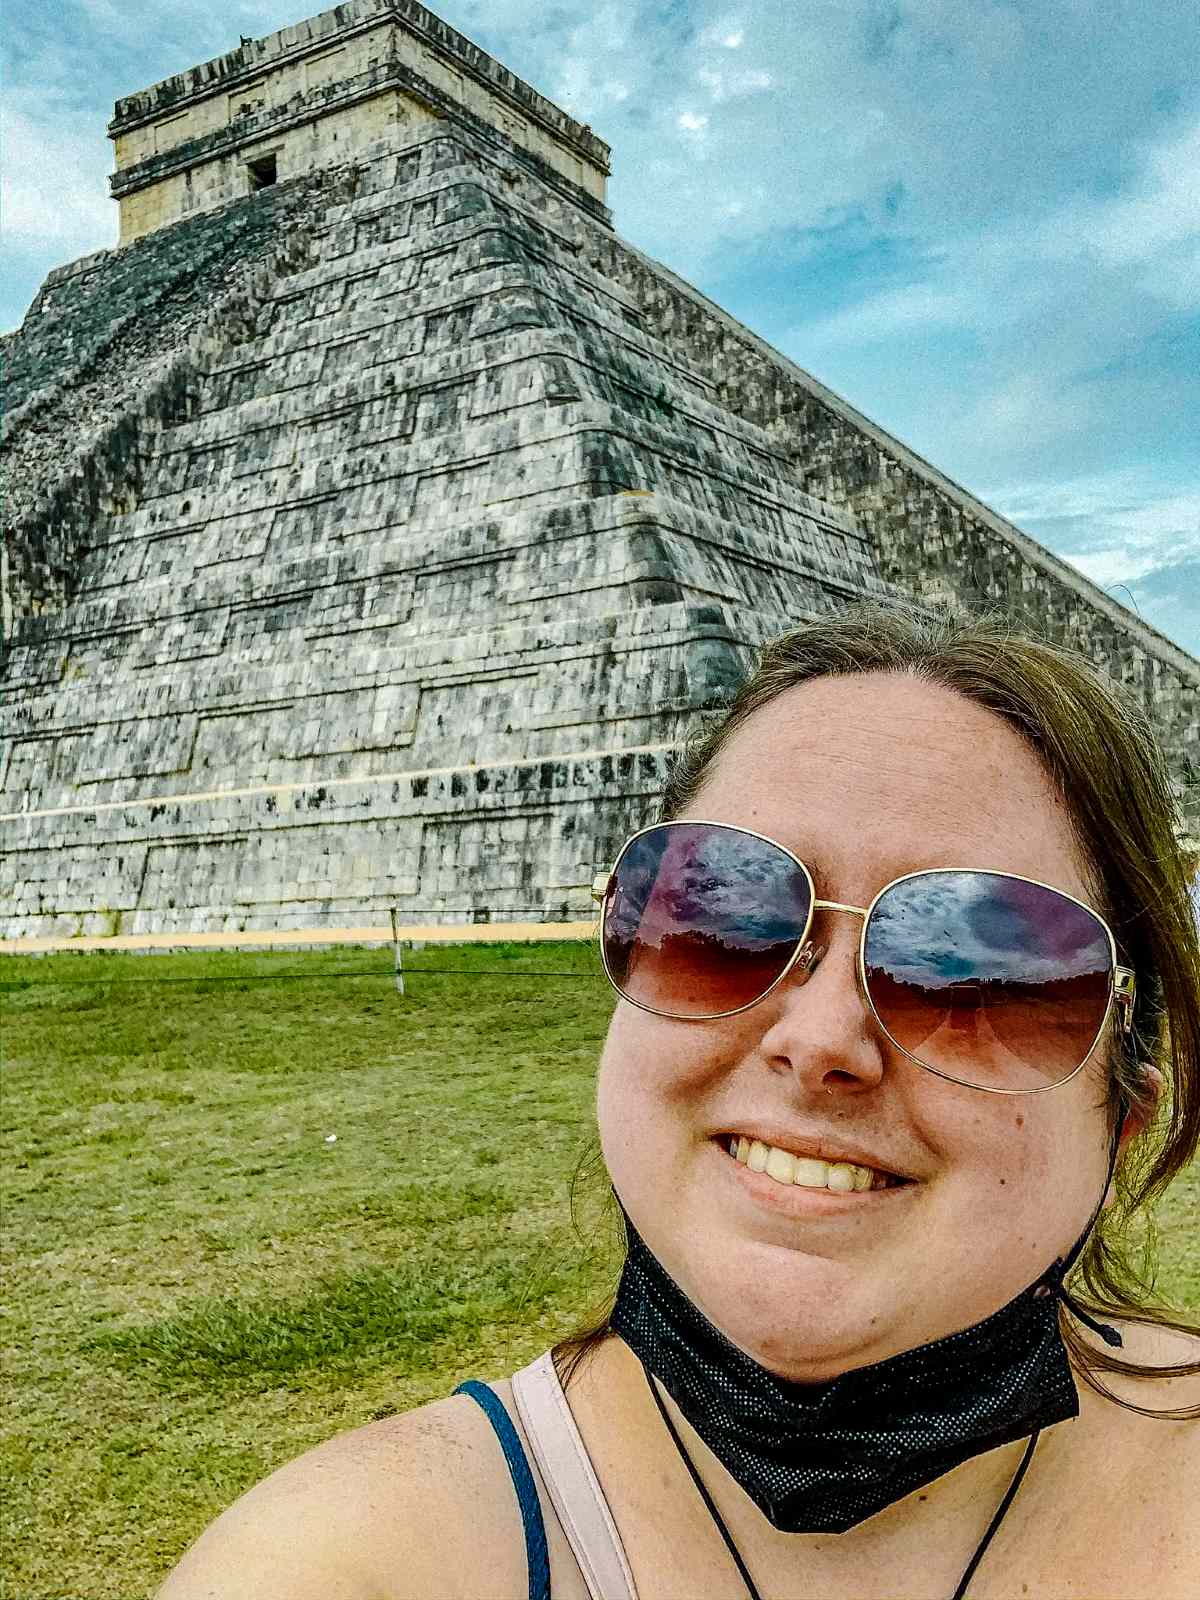 The blog author on a tour in front of a beautiful structure at Chichen Itza.